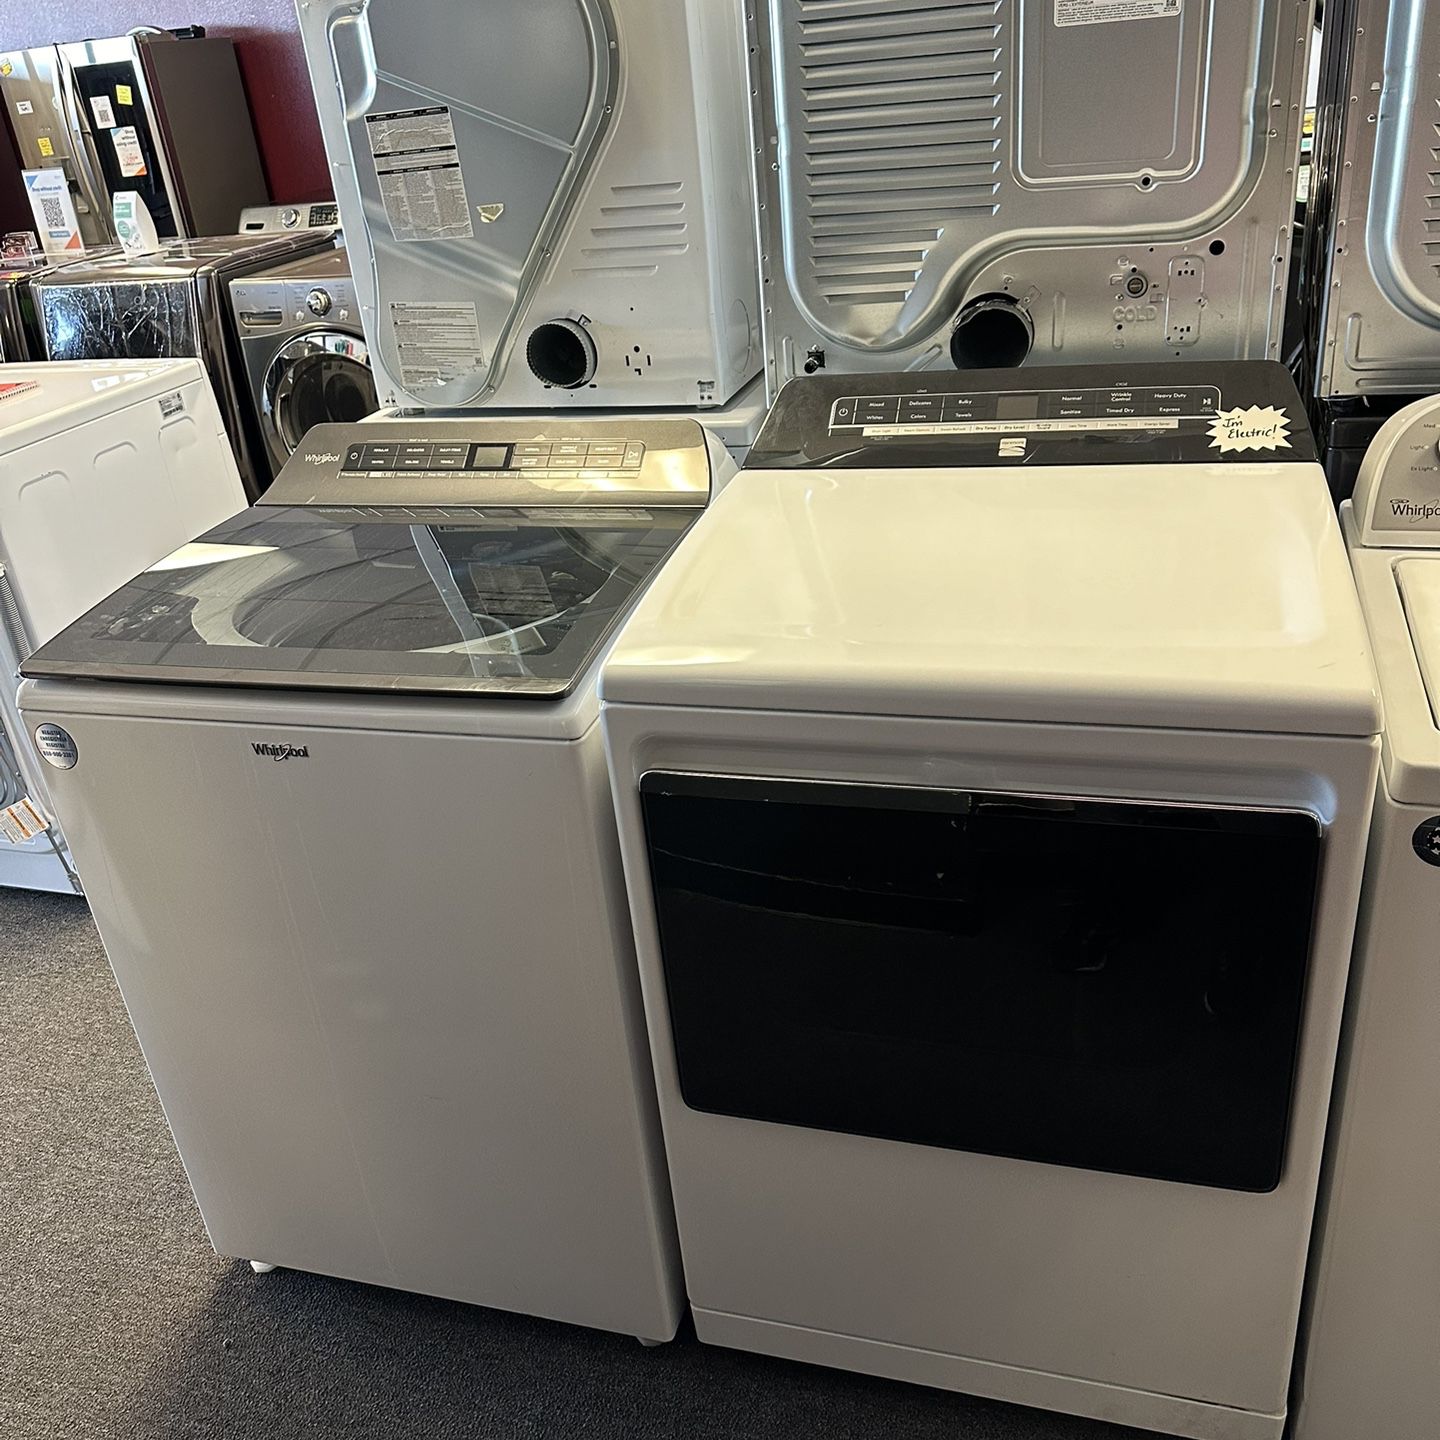 Gorgeous Whirlpool Washer And Kenmore Electric Dryer